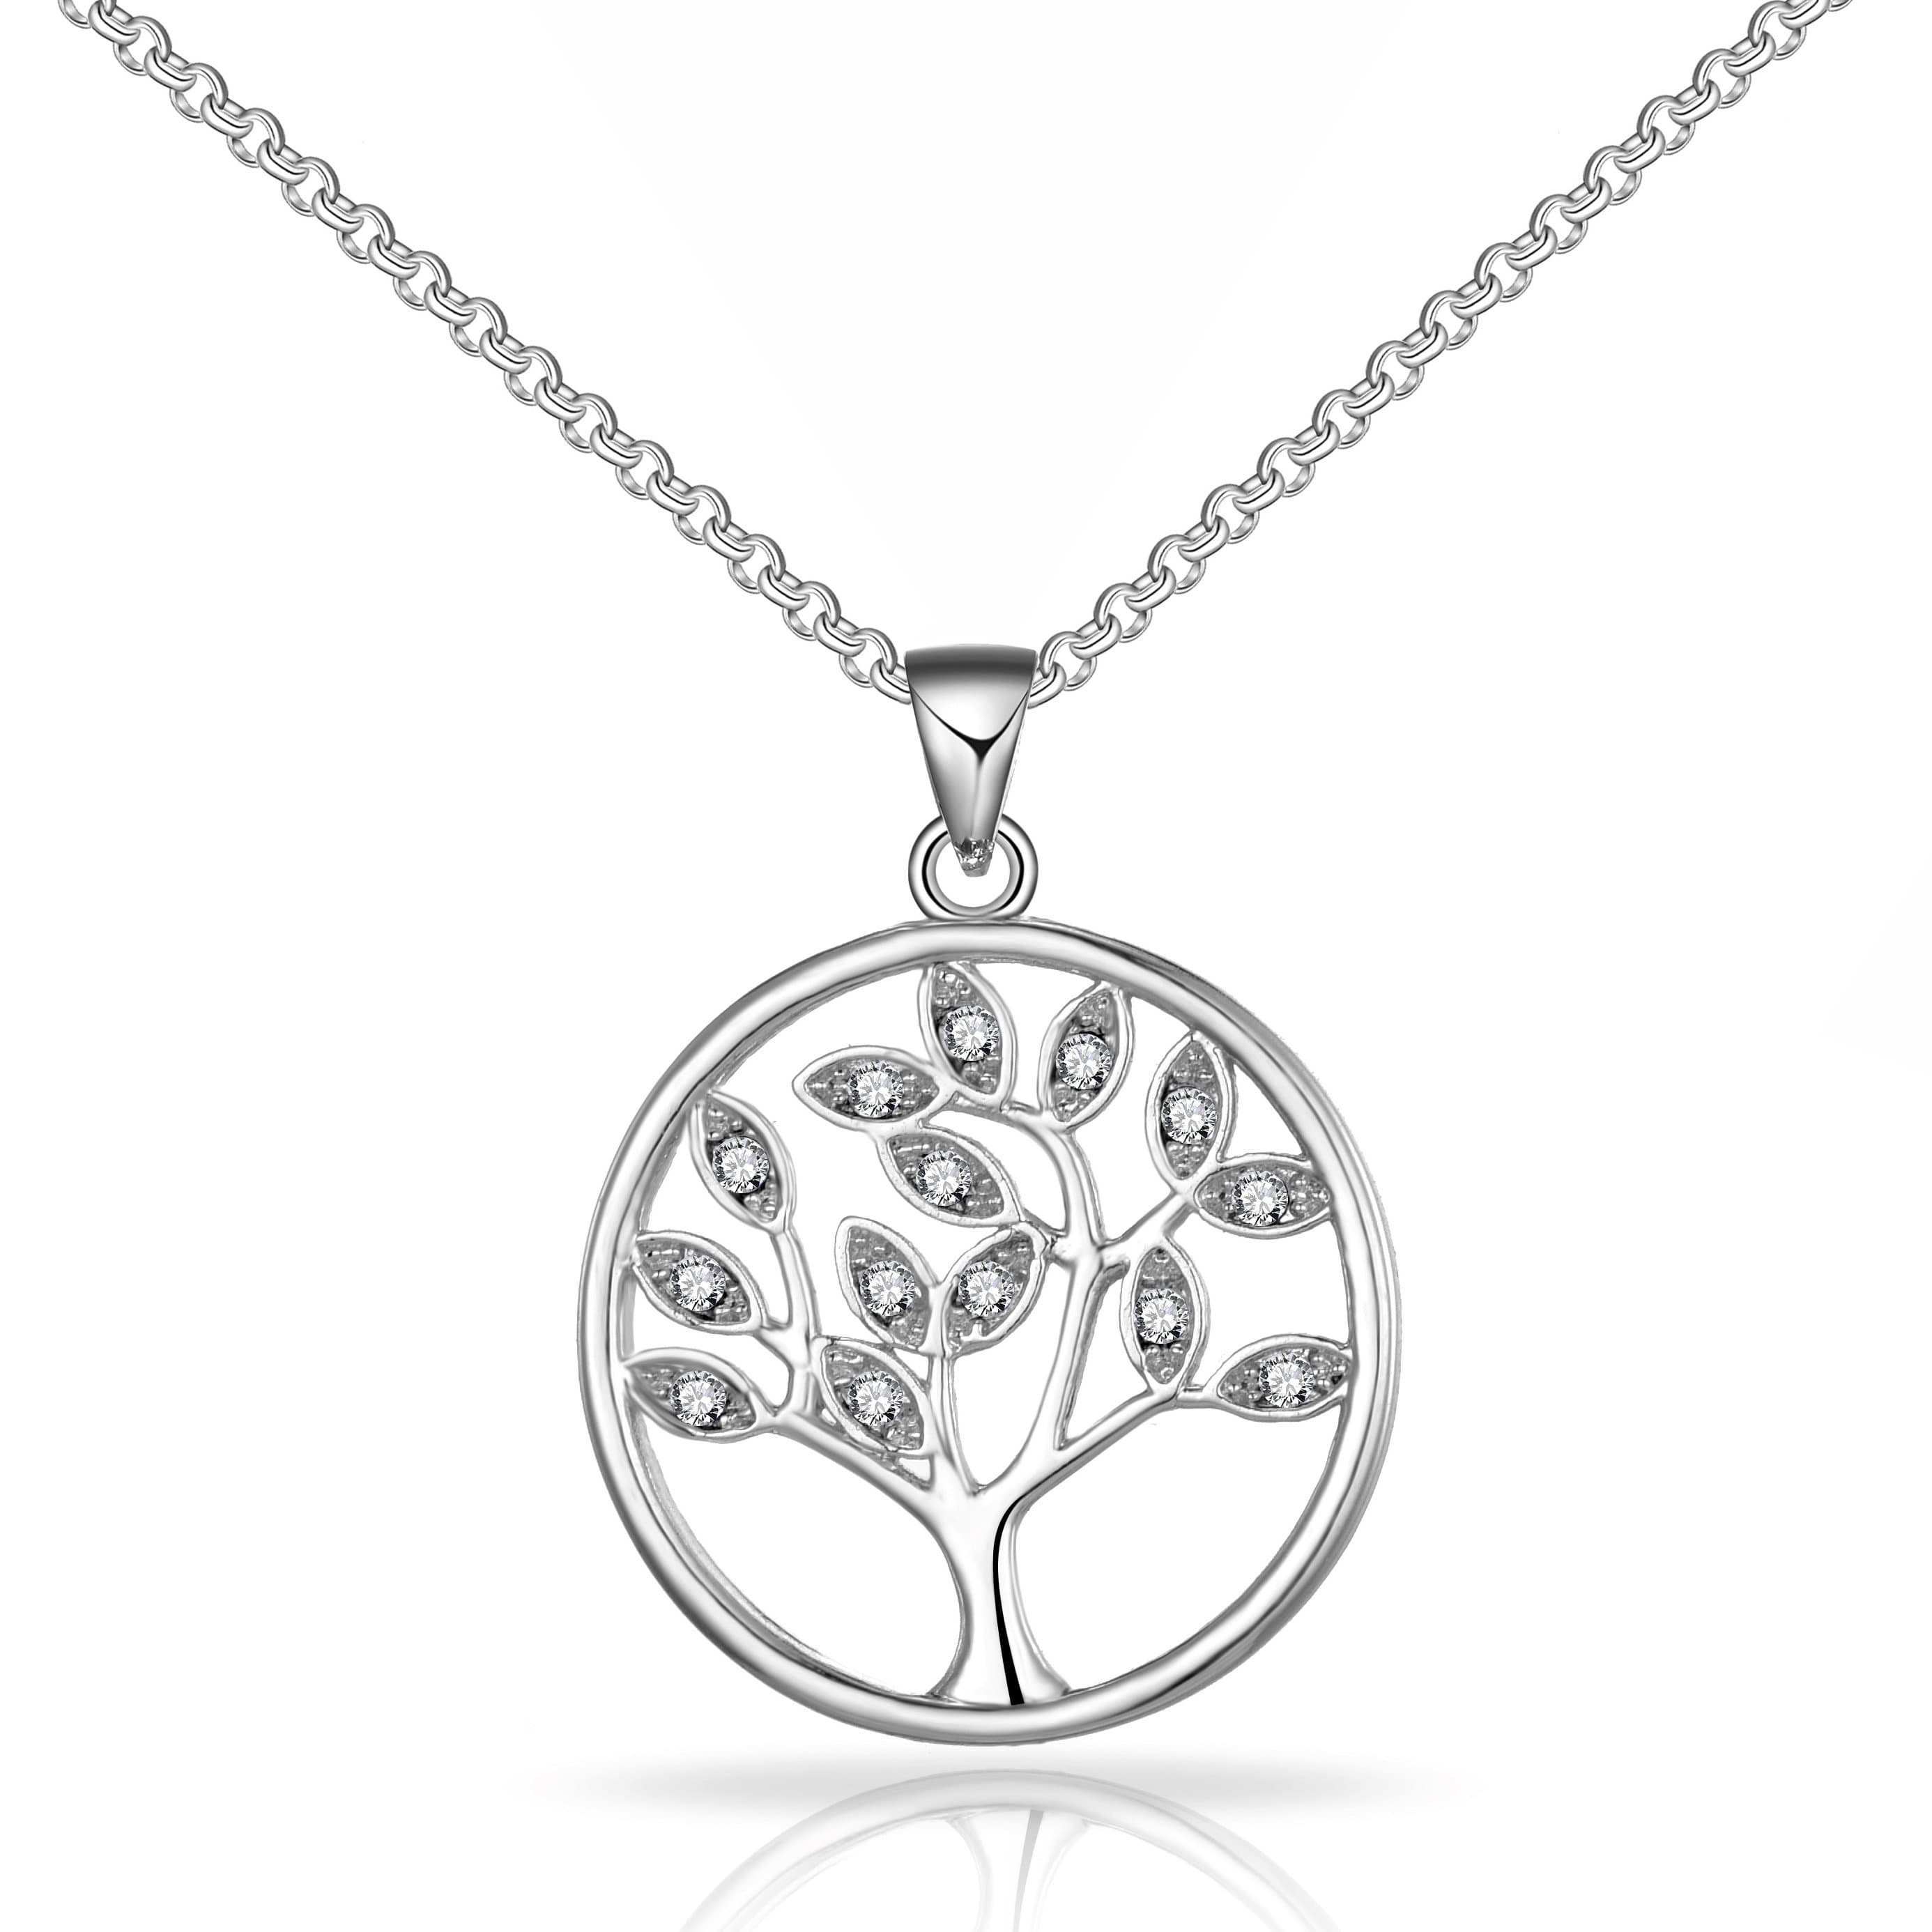 Silver Plated Tree of Life Necklace Created with Zircondia® Crystals by Philip Jones Jewellery